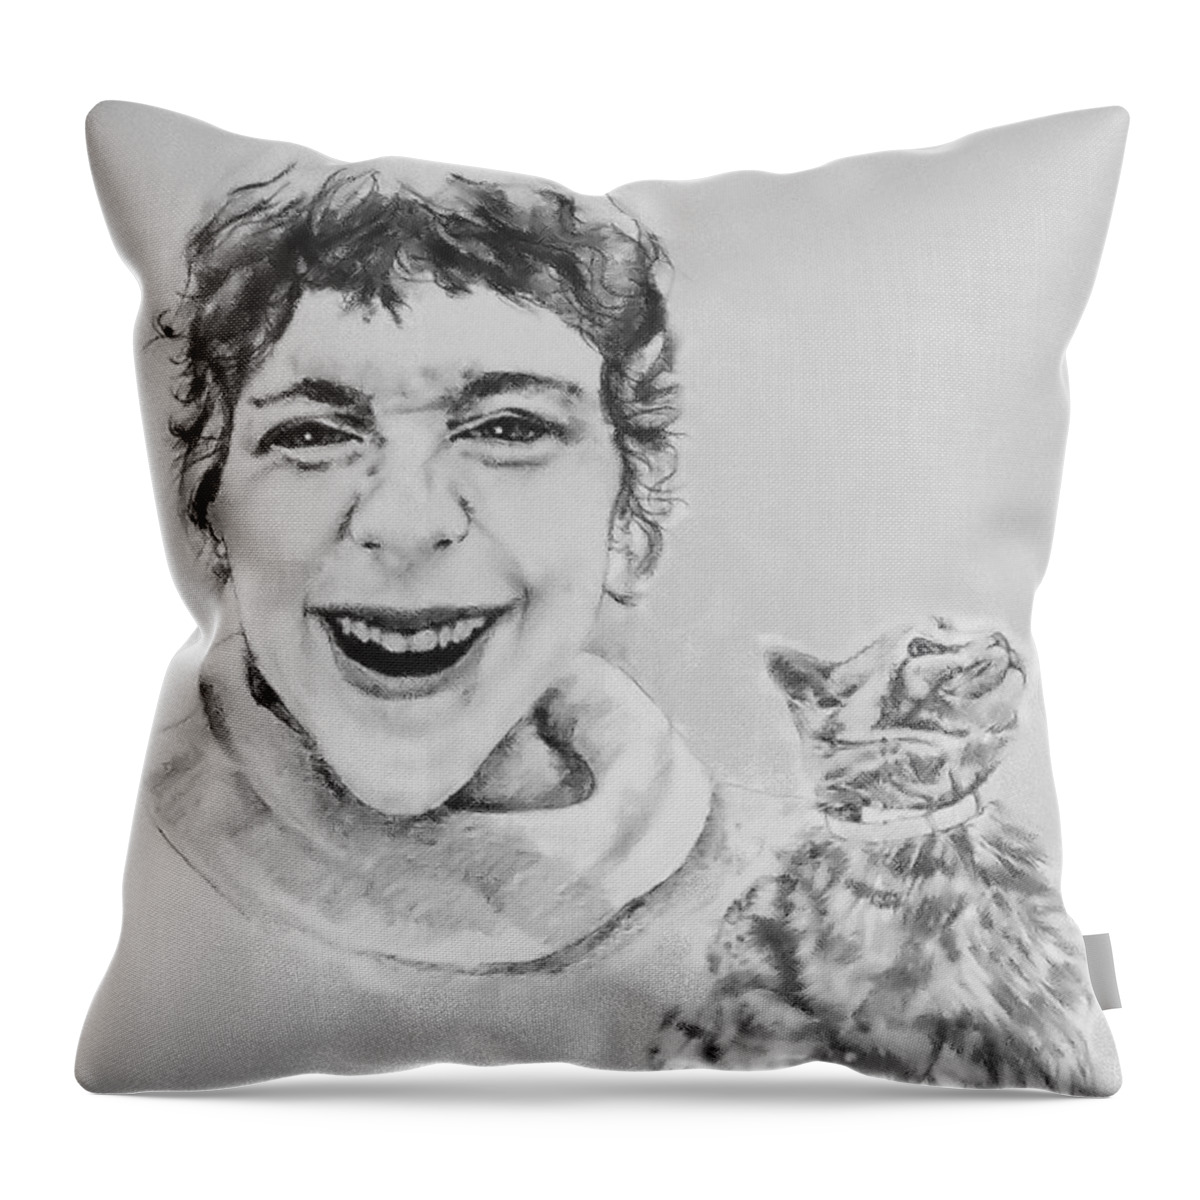 Portrait Throw Pillow featuring the drawing Randolph And Marmalade by Rory Siegel